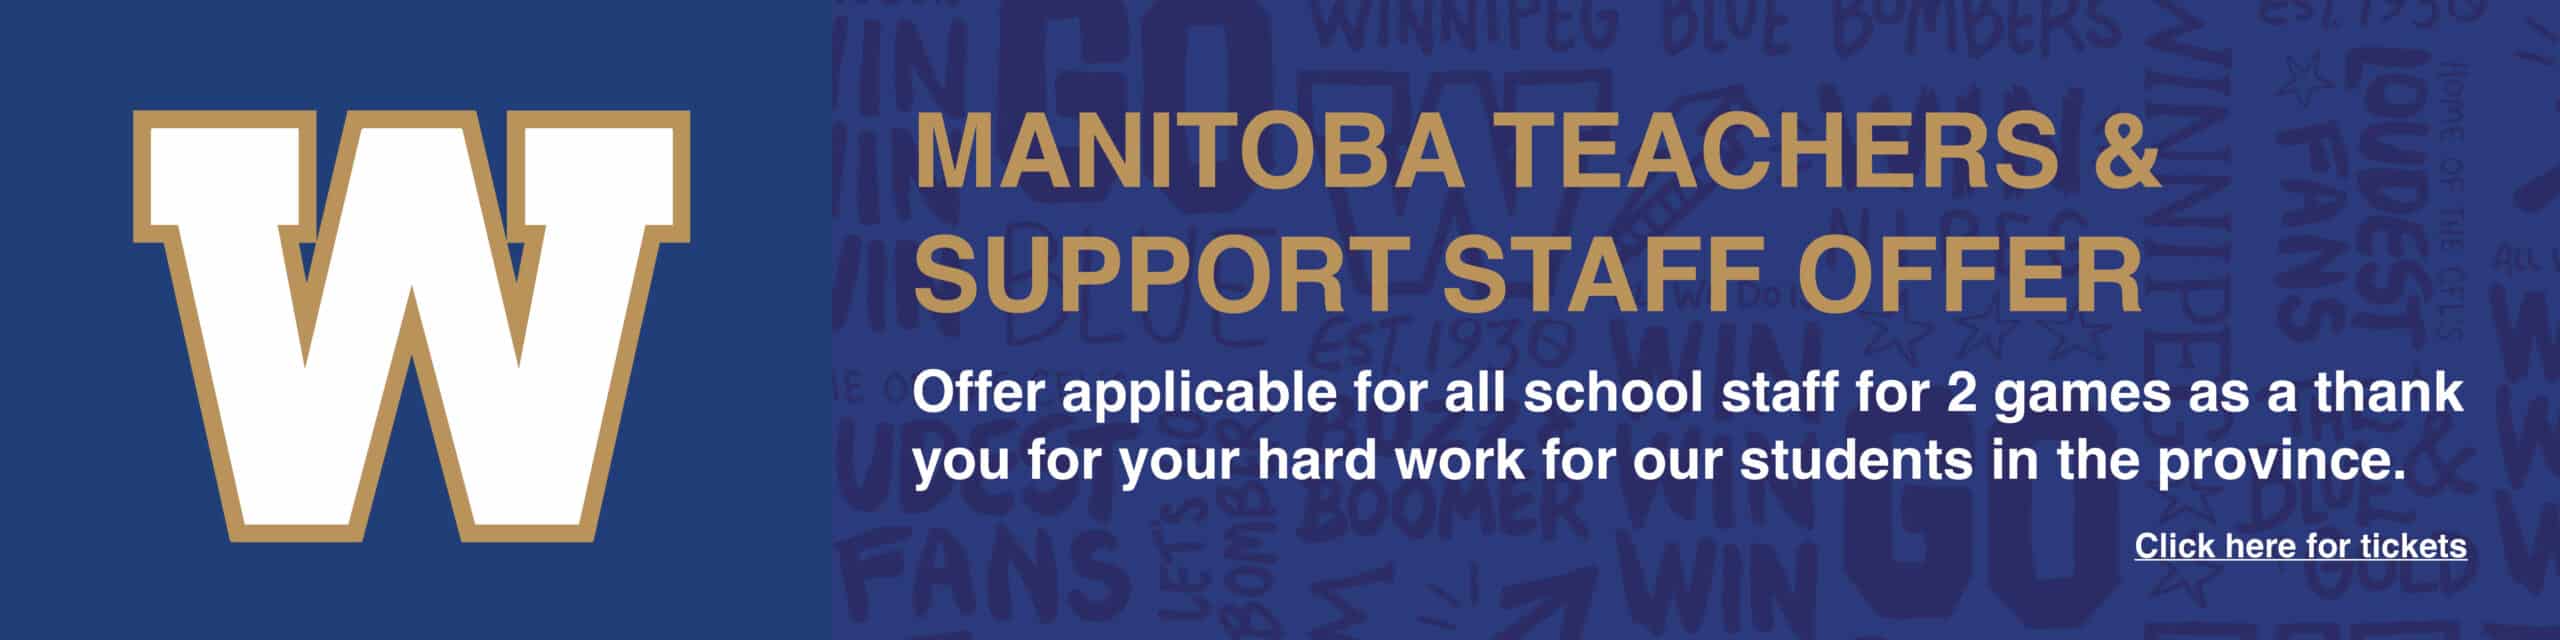 WInnipeg Blue Bomber Manitoba Teachers and Support Staff Ticket Offer for 2 Games